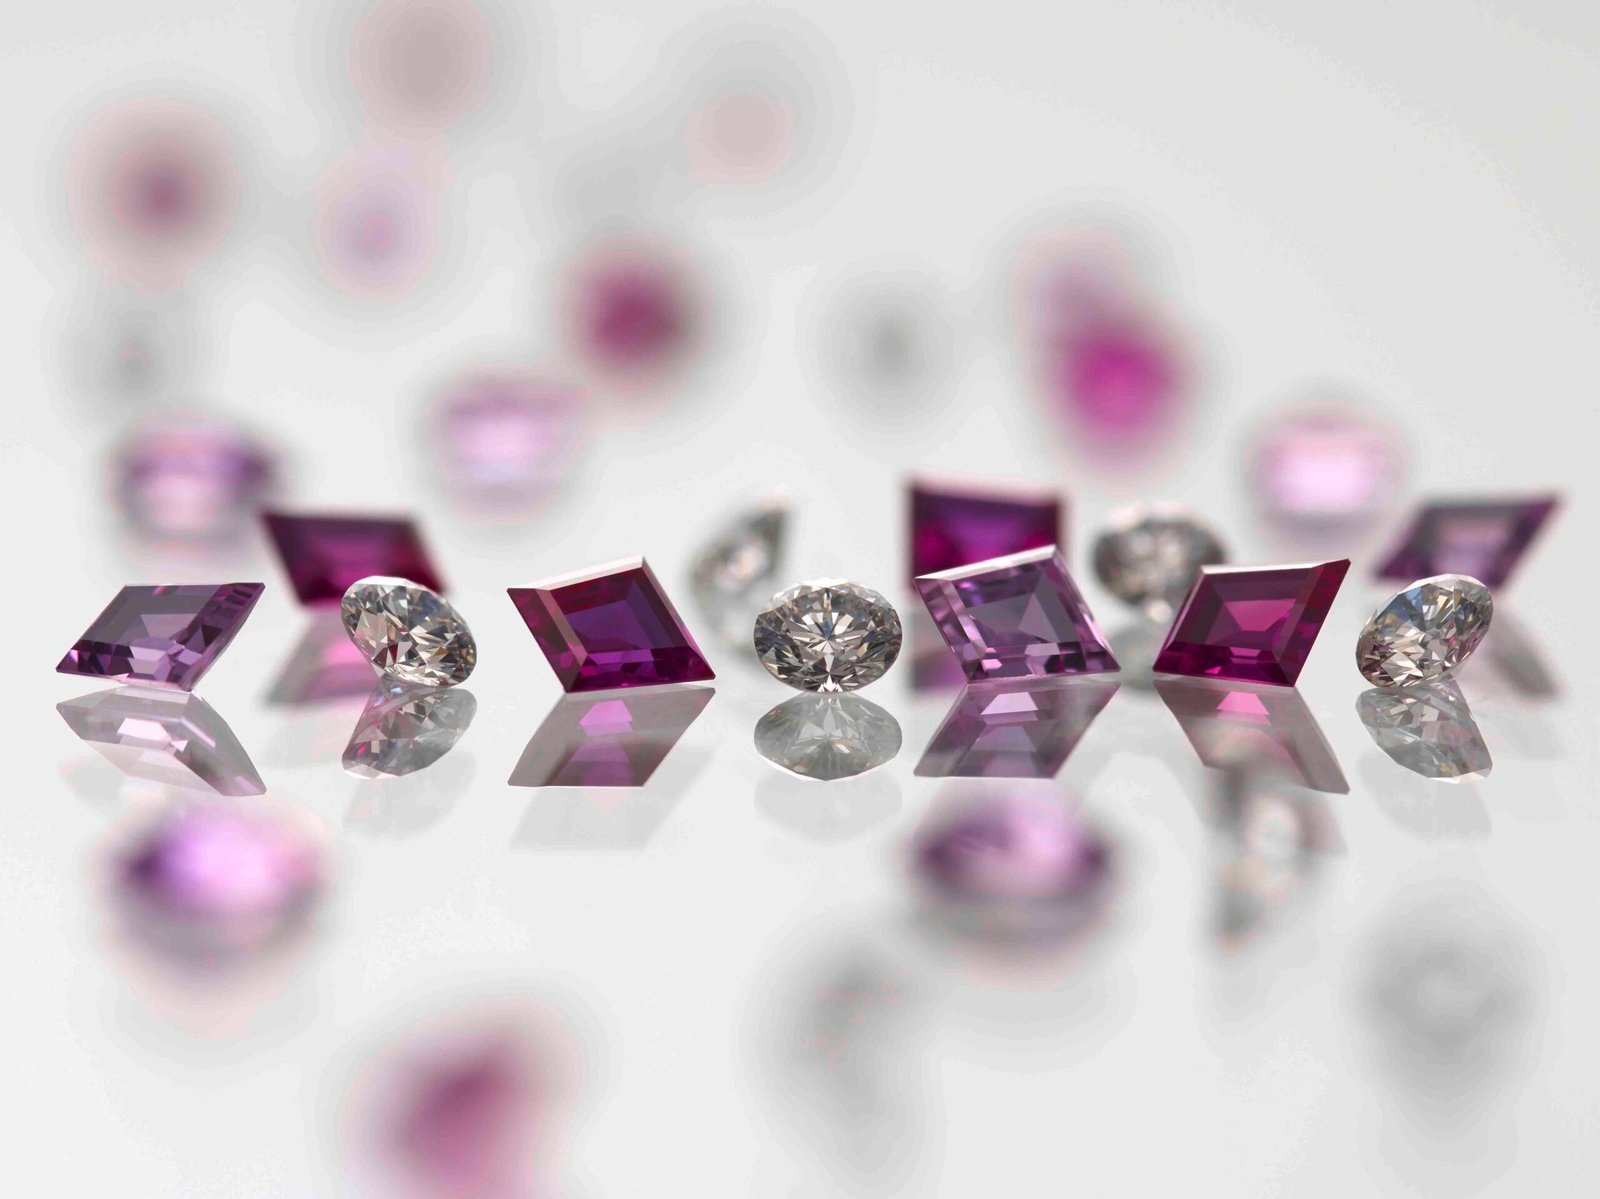 Rolex’s Art of Gem Setting: Pure and Shining